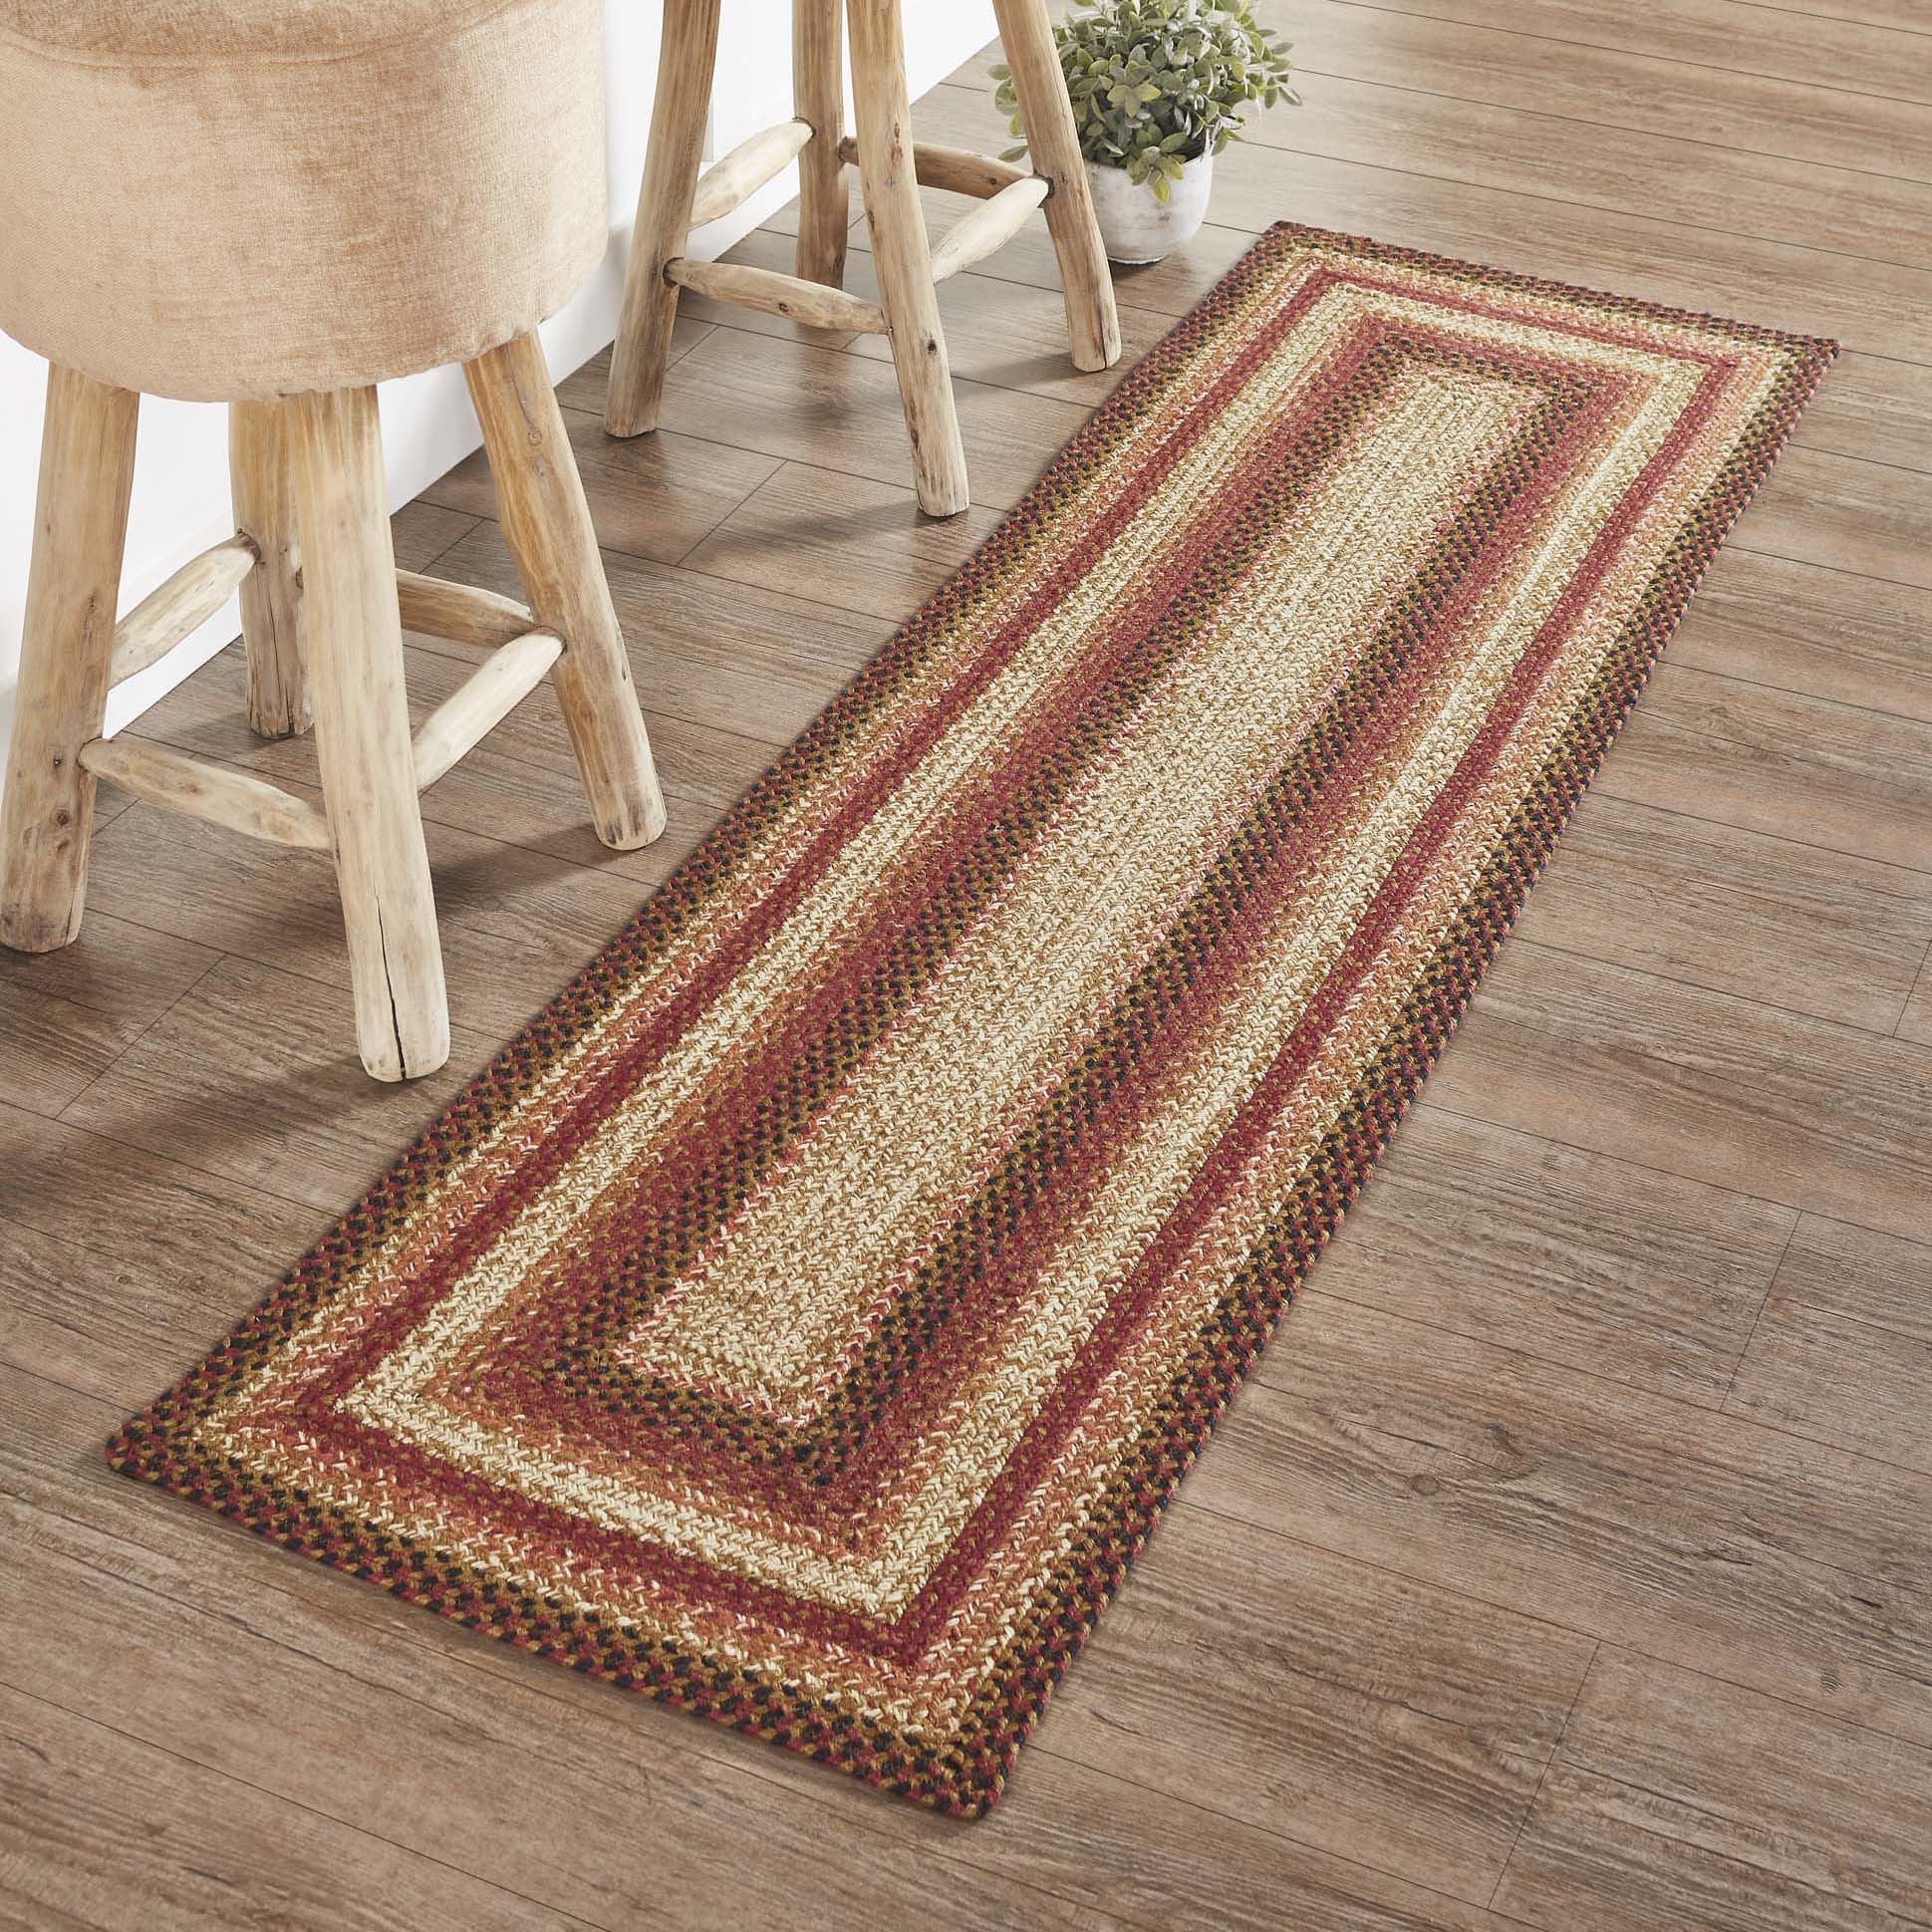 67119-Ginger-Spice-Jute-Rug-Runner-Rect-w-Pad-22x72-image-1